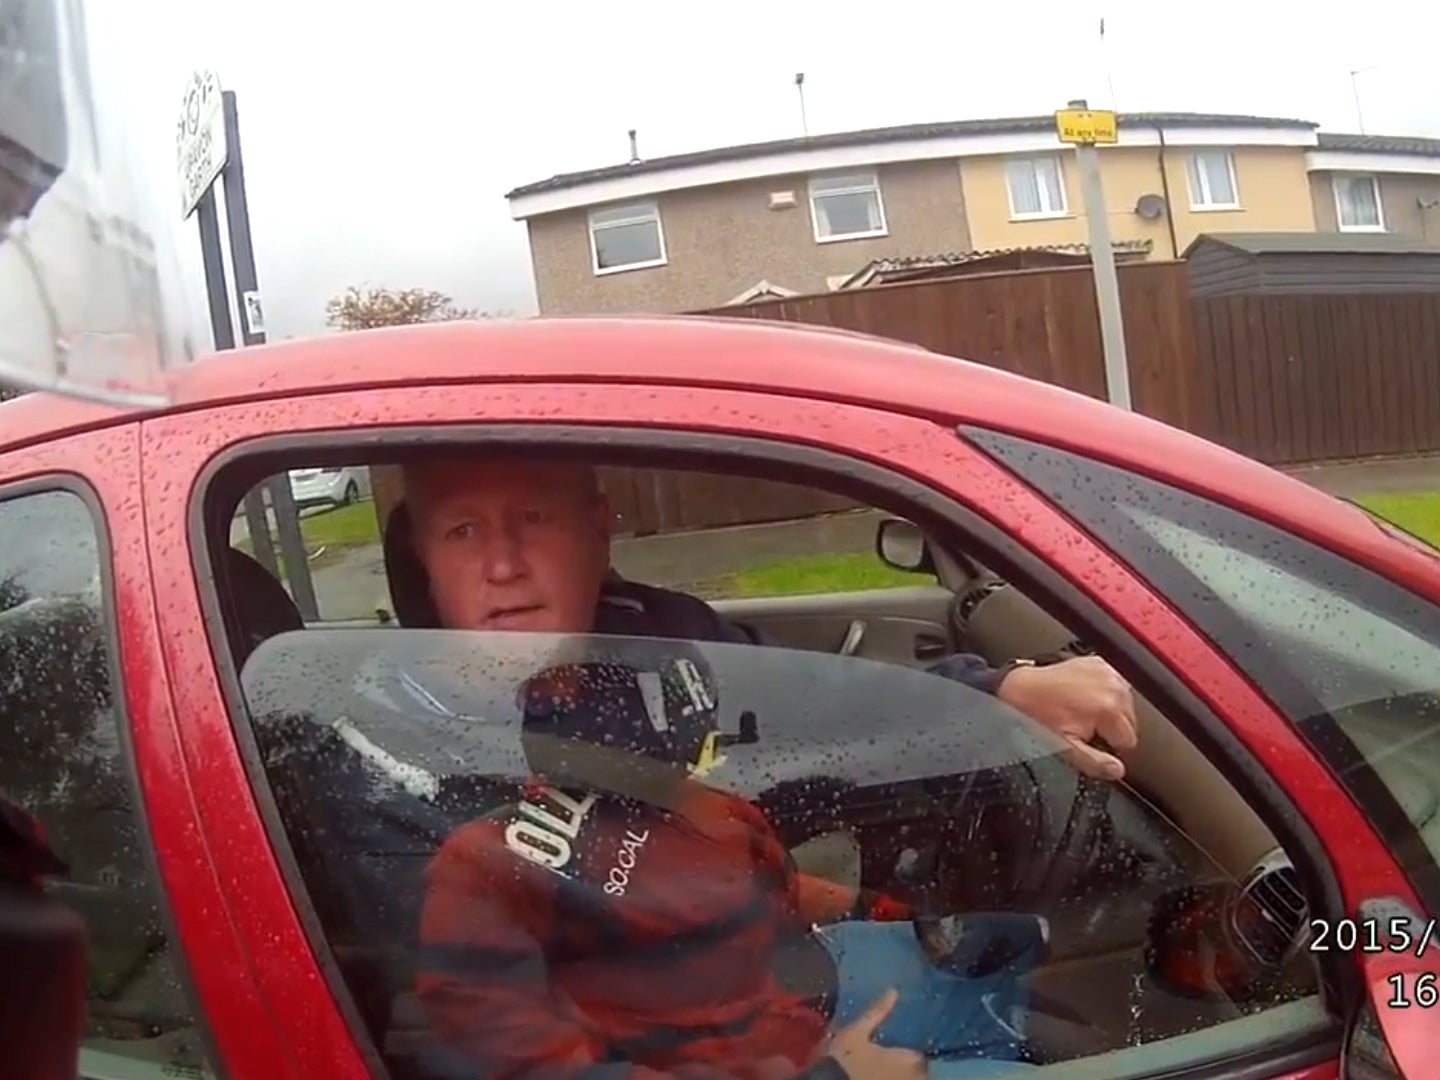 Footage emerges showing driver asking motorcyclist for a ‘bare-knuckled fight’